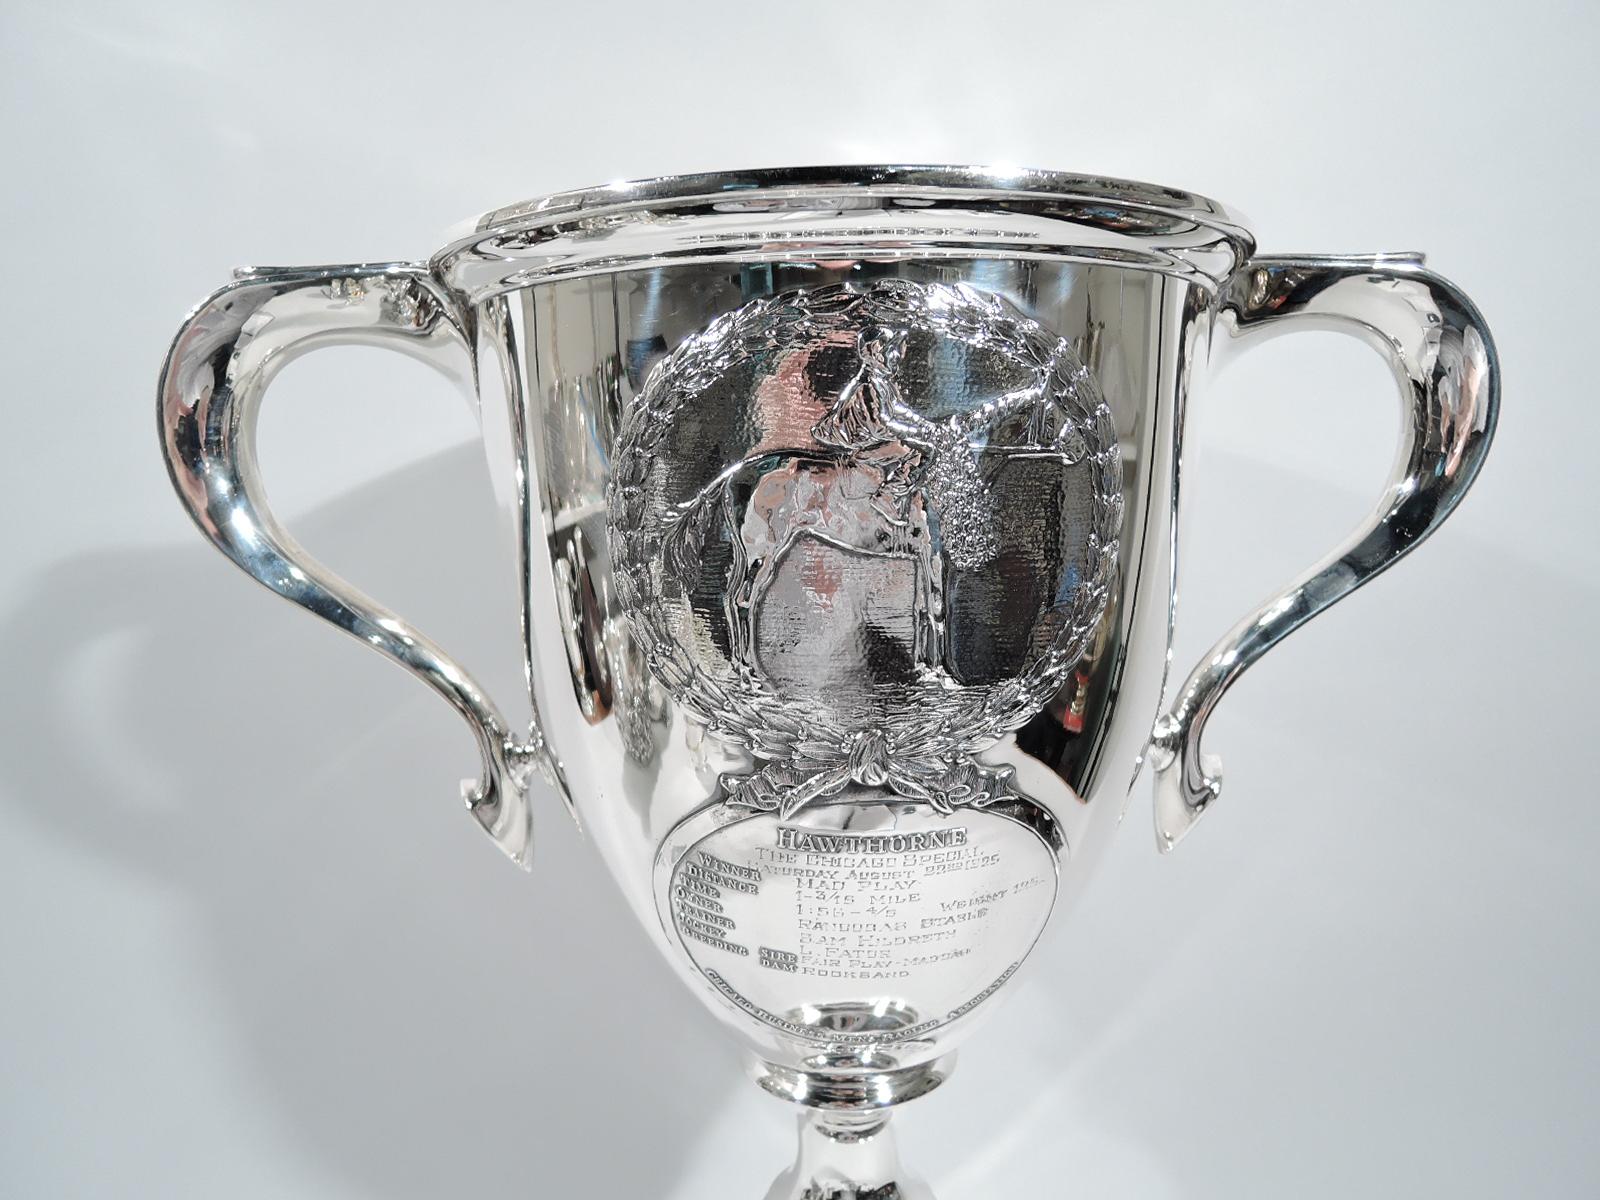 Edwardian sterling silver trophy cup. Oval bowl with capped and scrolled side handles; spool support and raised and stepped foot. On front is applied is a wreath with mounted horse covered in laurels. Below is a round strap frame with “Hawthorne” at